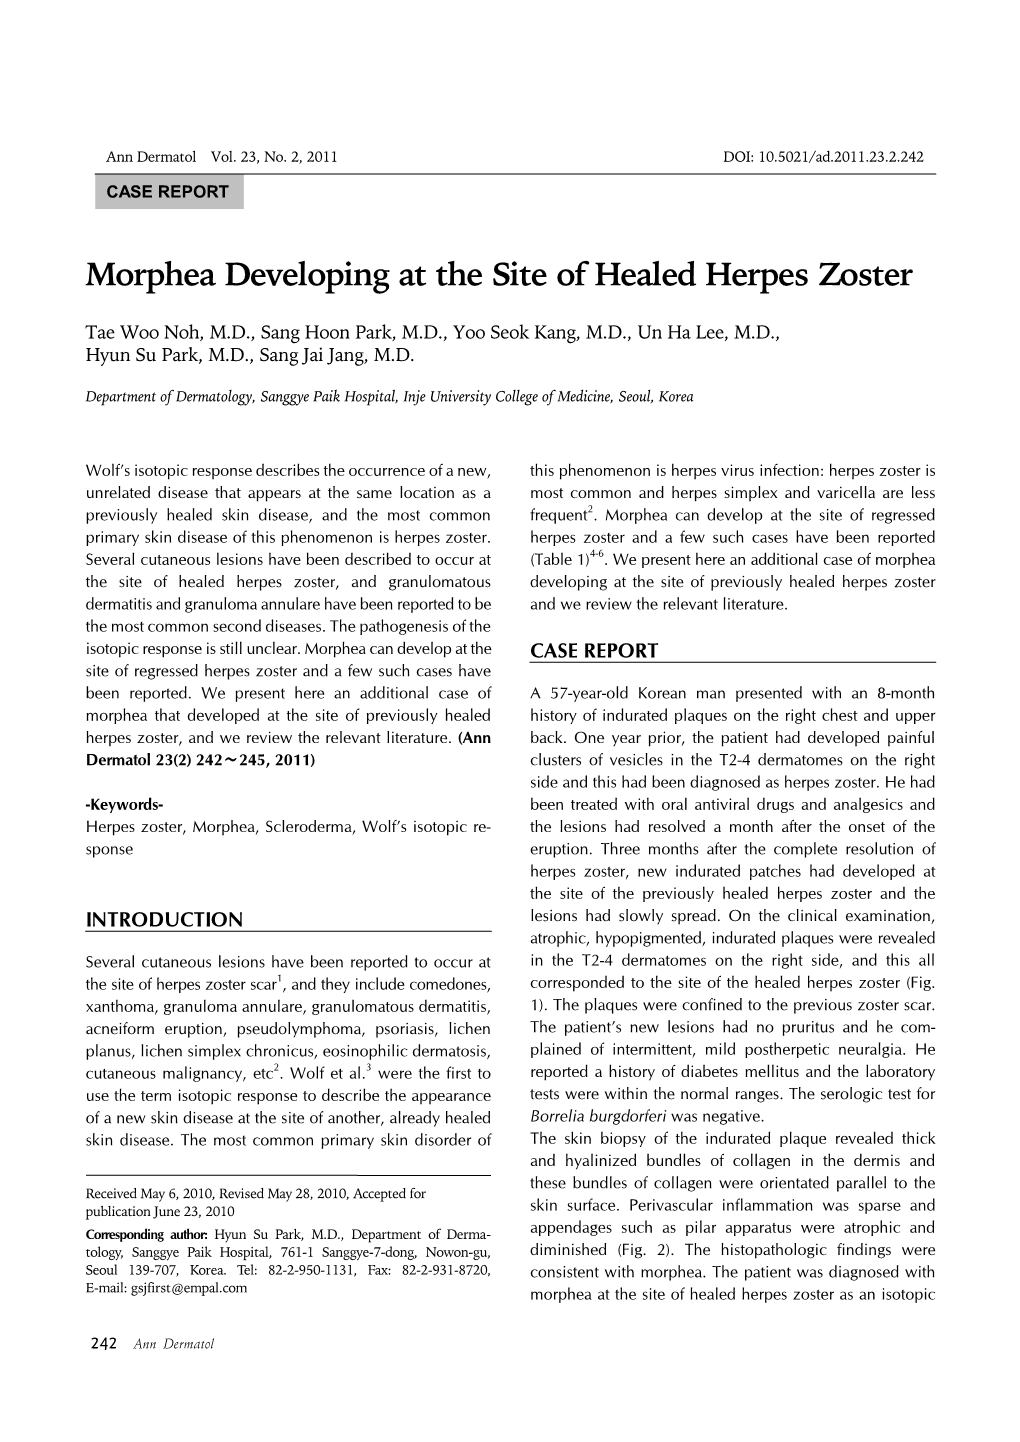 Morphea Developing at the Site of Healed Herpes Zoster